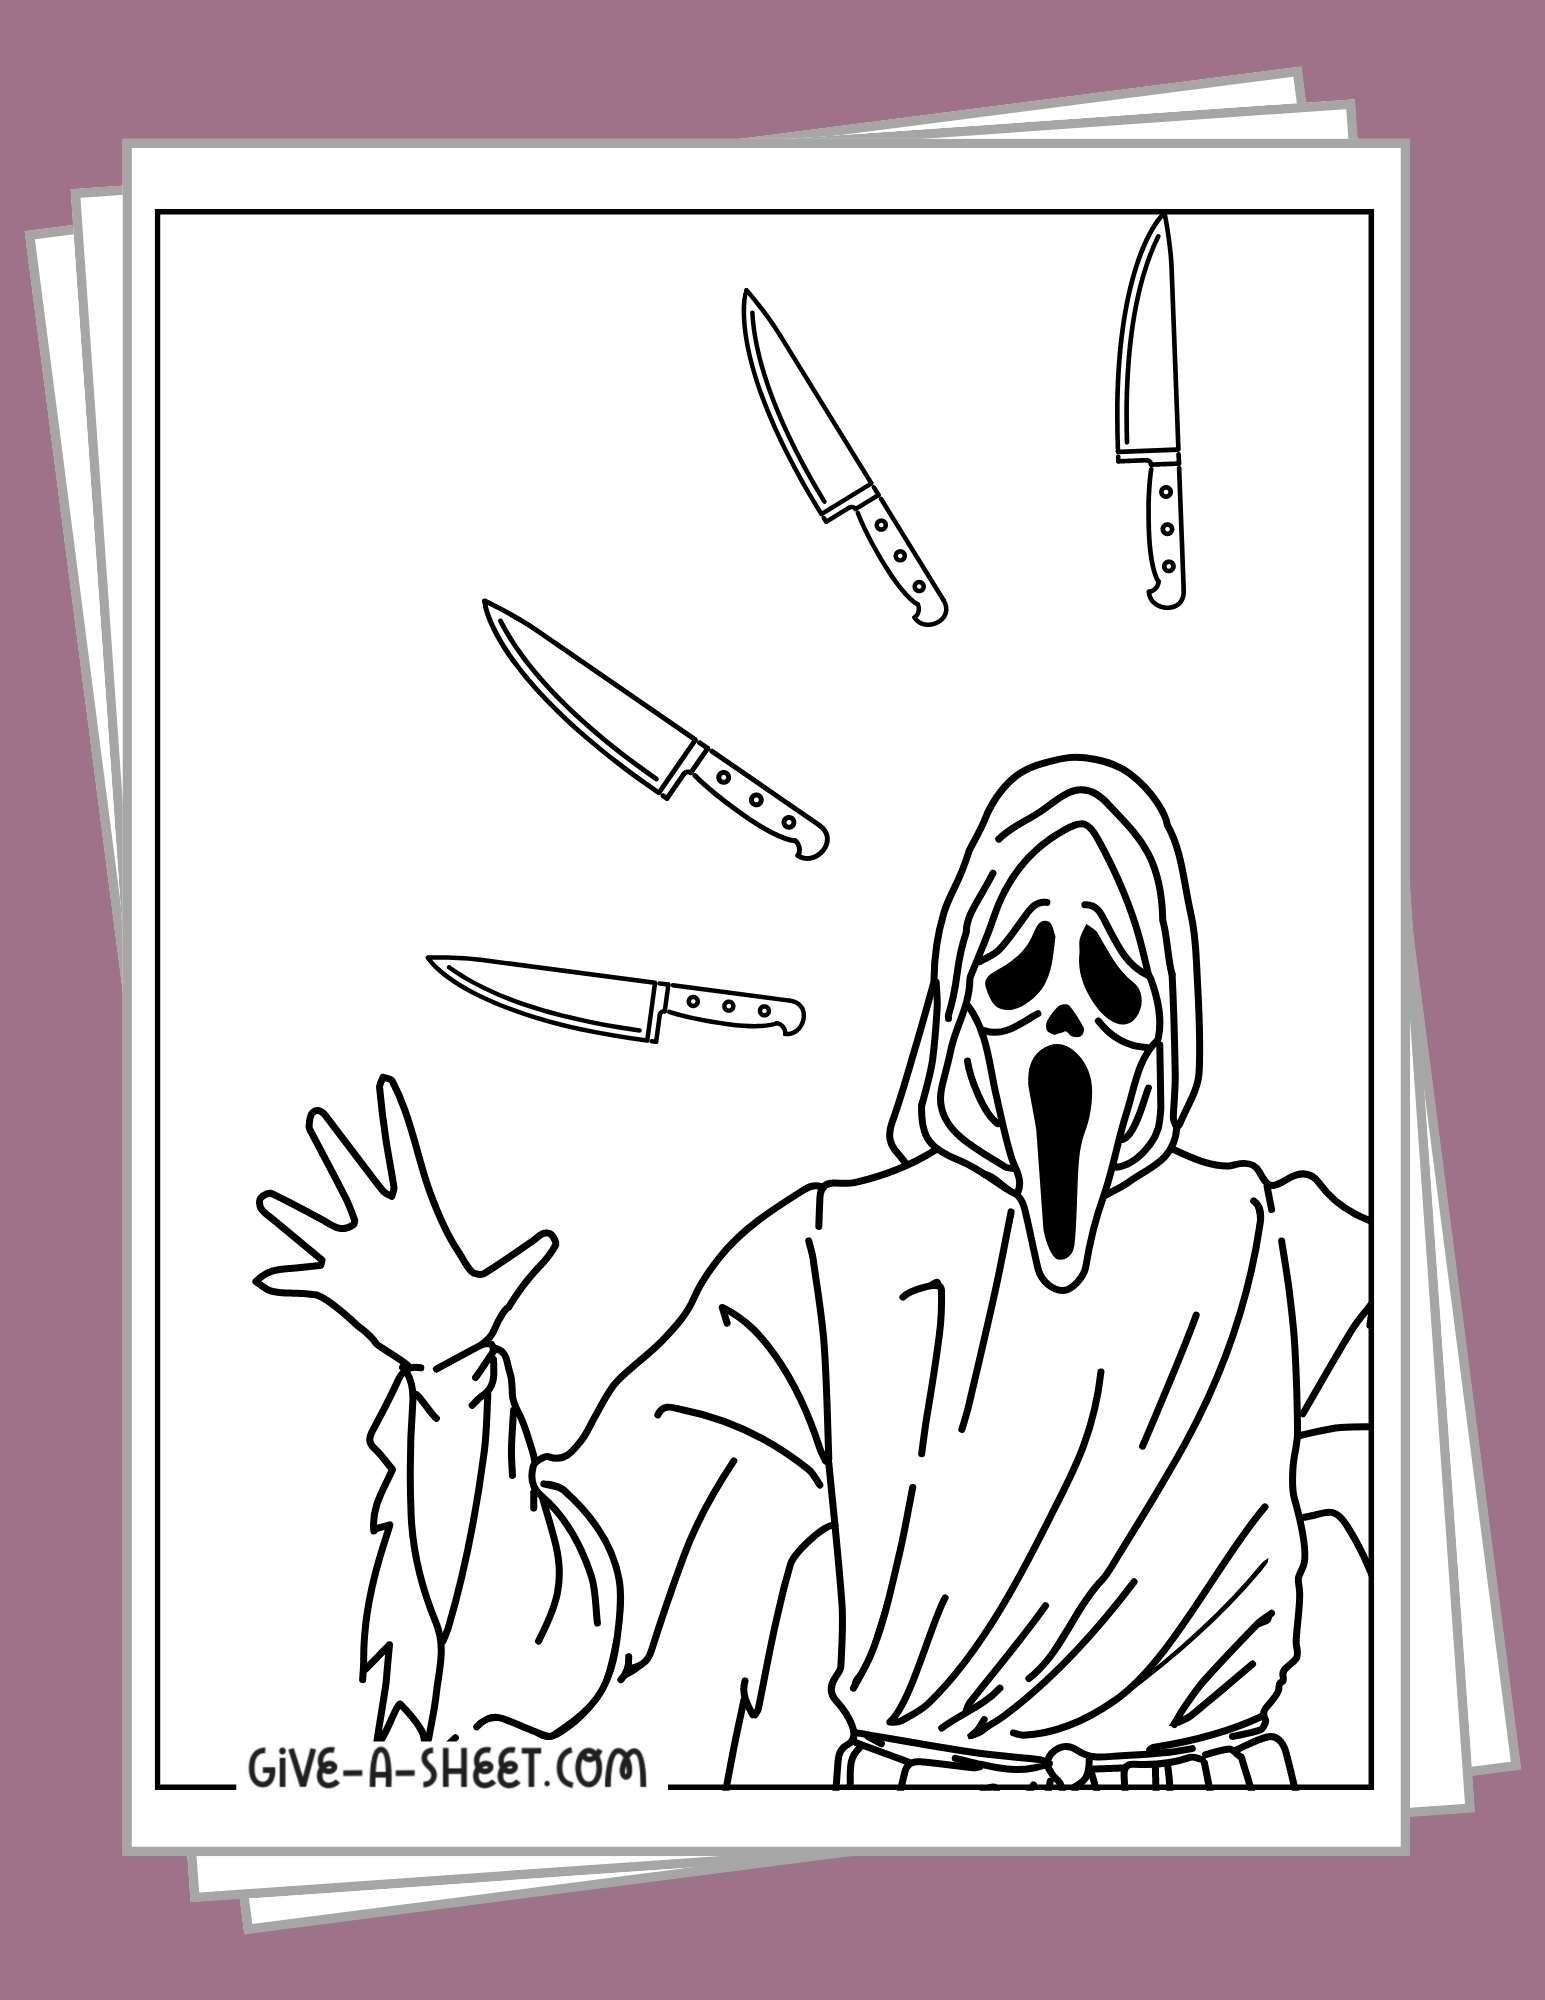 Ghostface coloring pages free scream movie pdf printables witch coloring pages halloween coloring pages halloween coloring